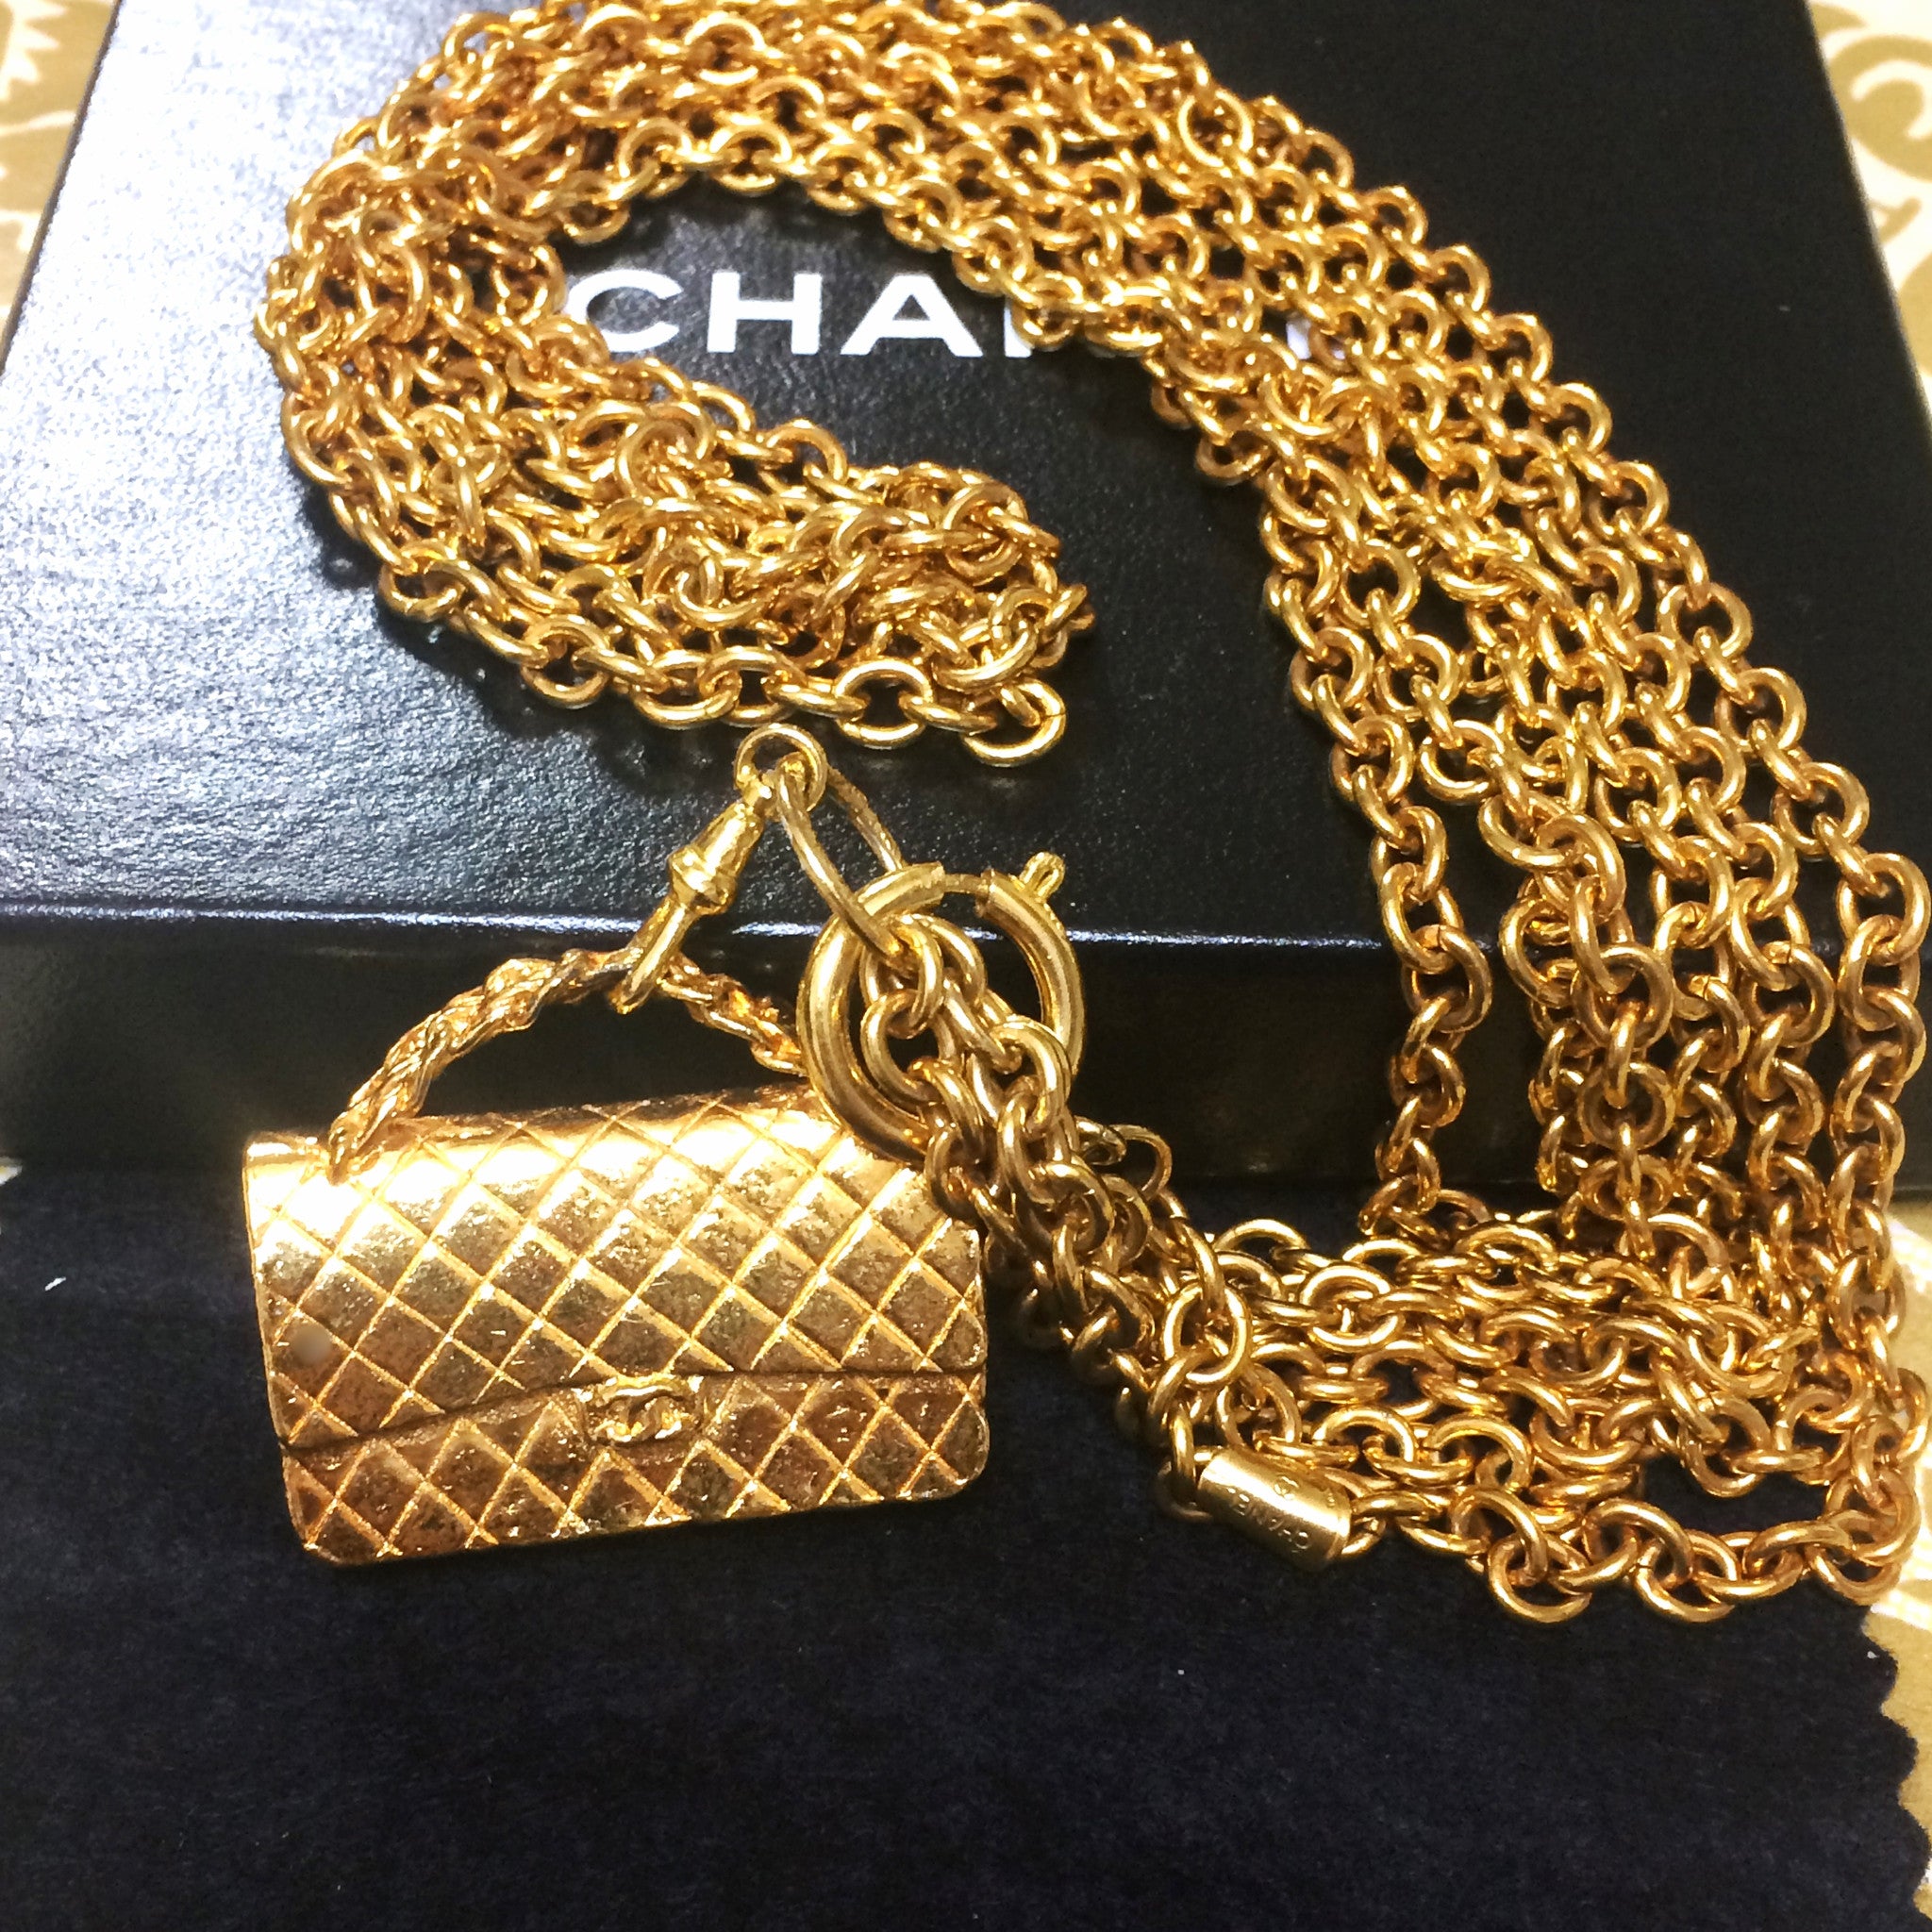 chanel necklace bag